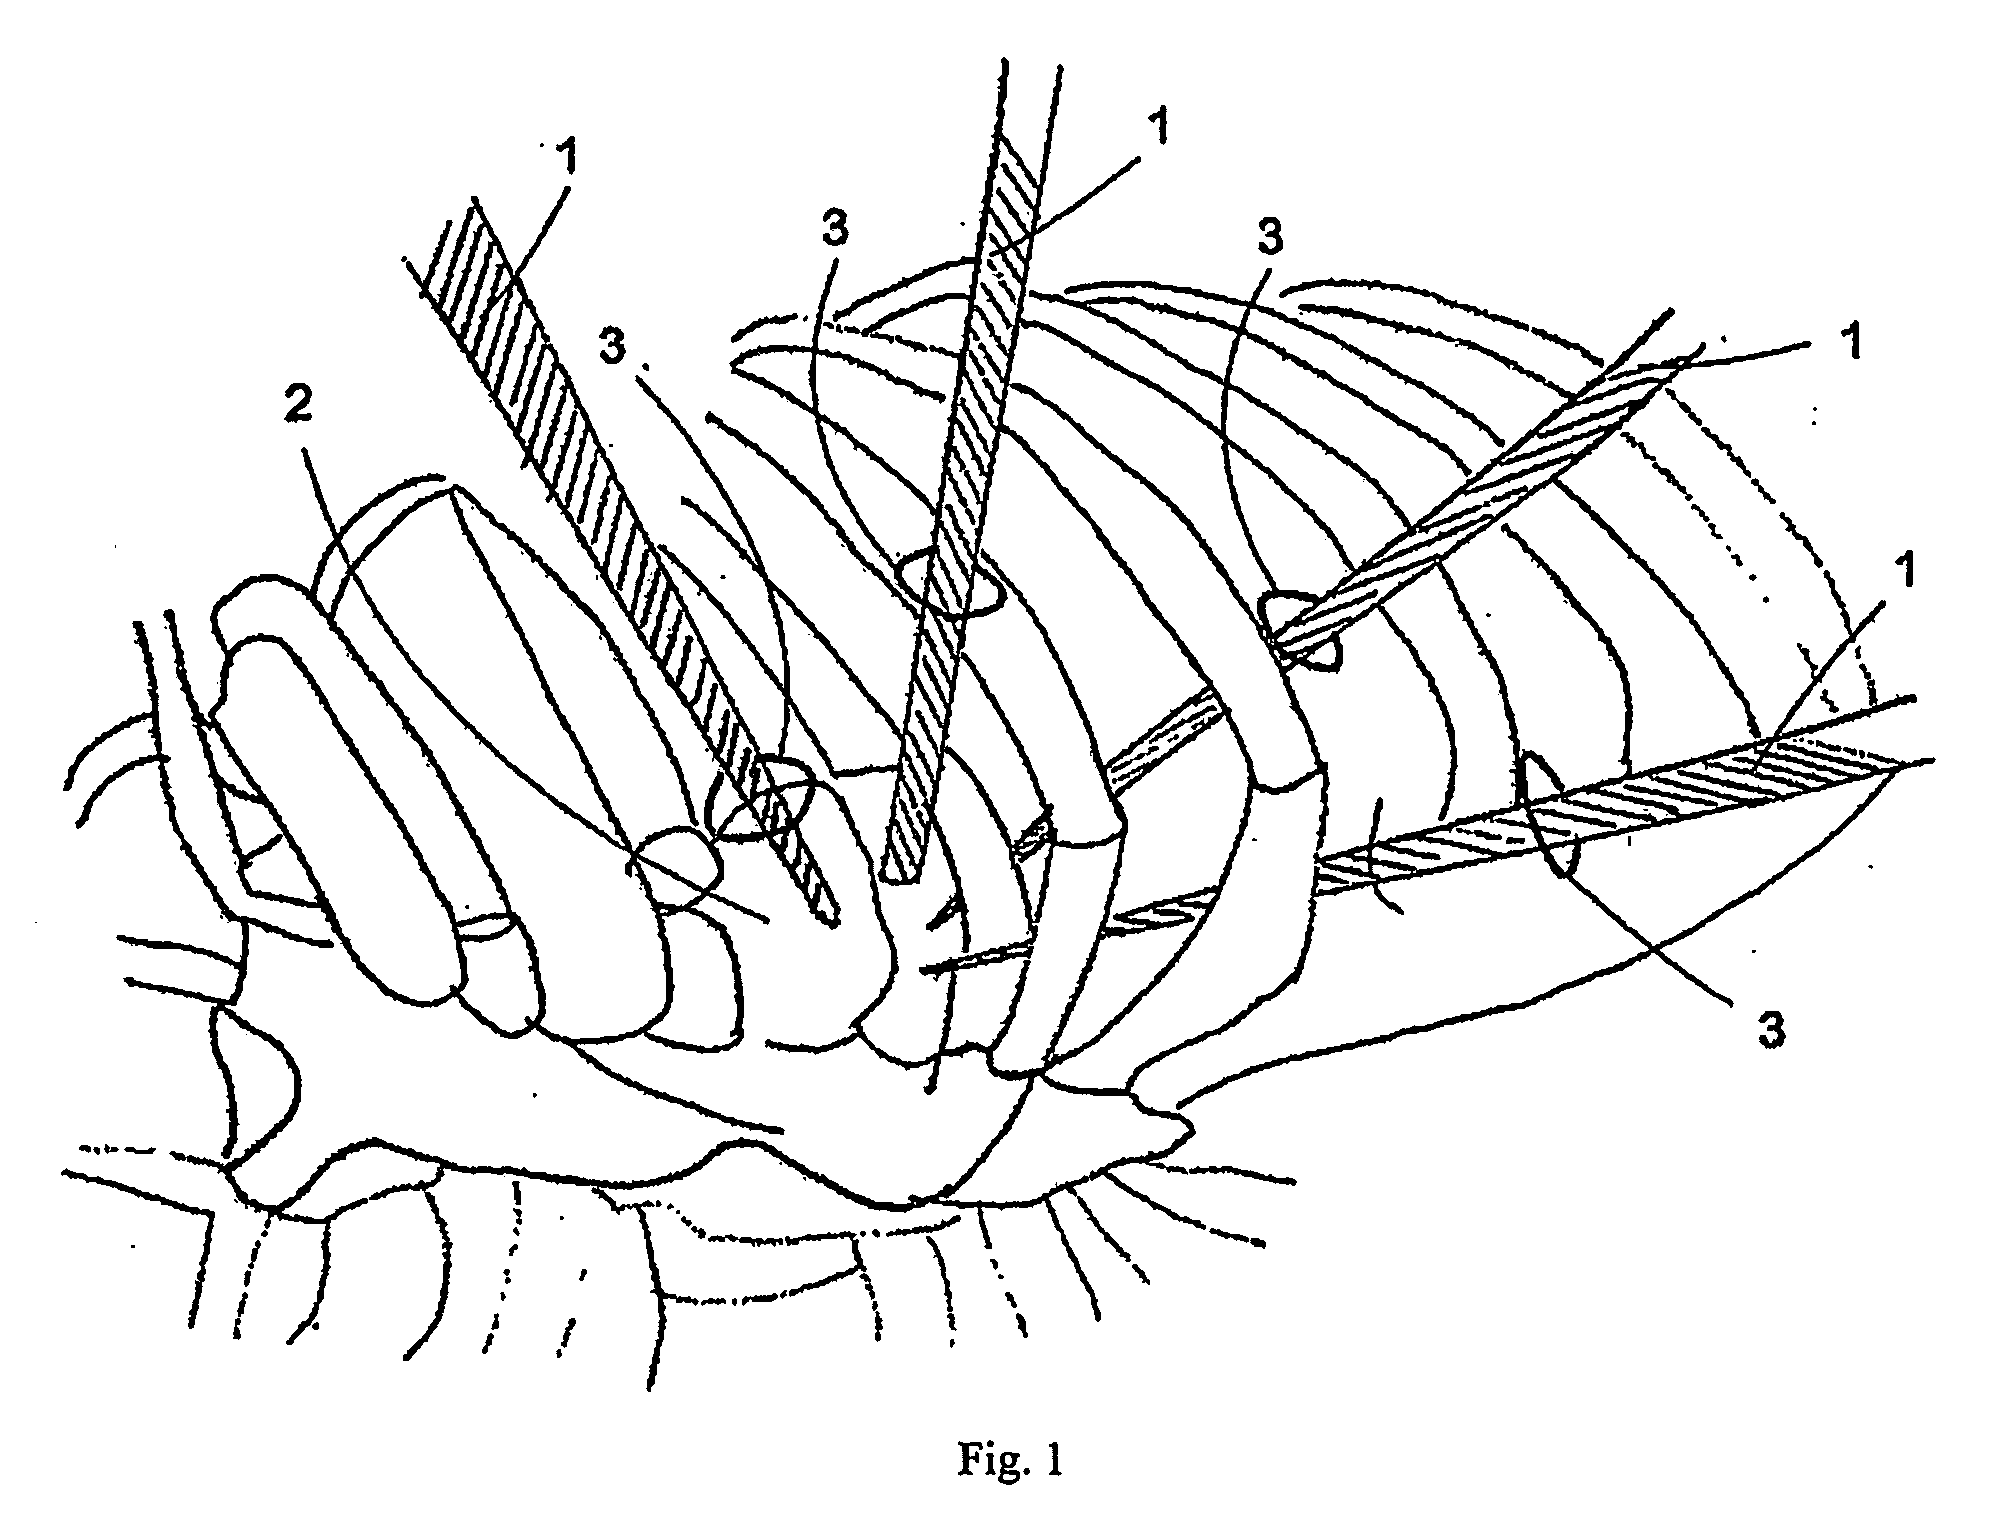 Force reflective robotic control system and minimally invasive surgical device